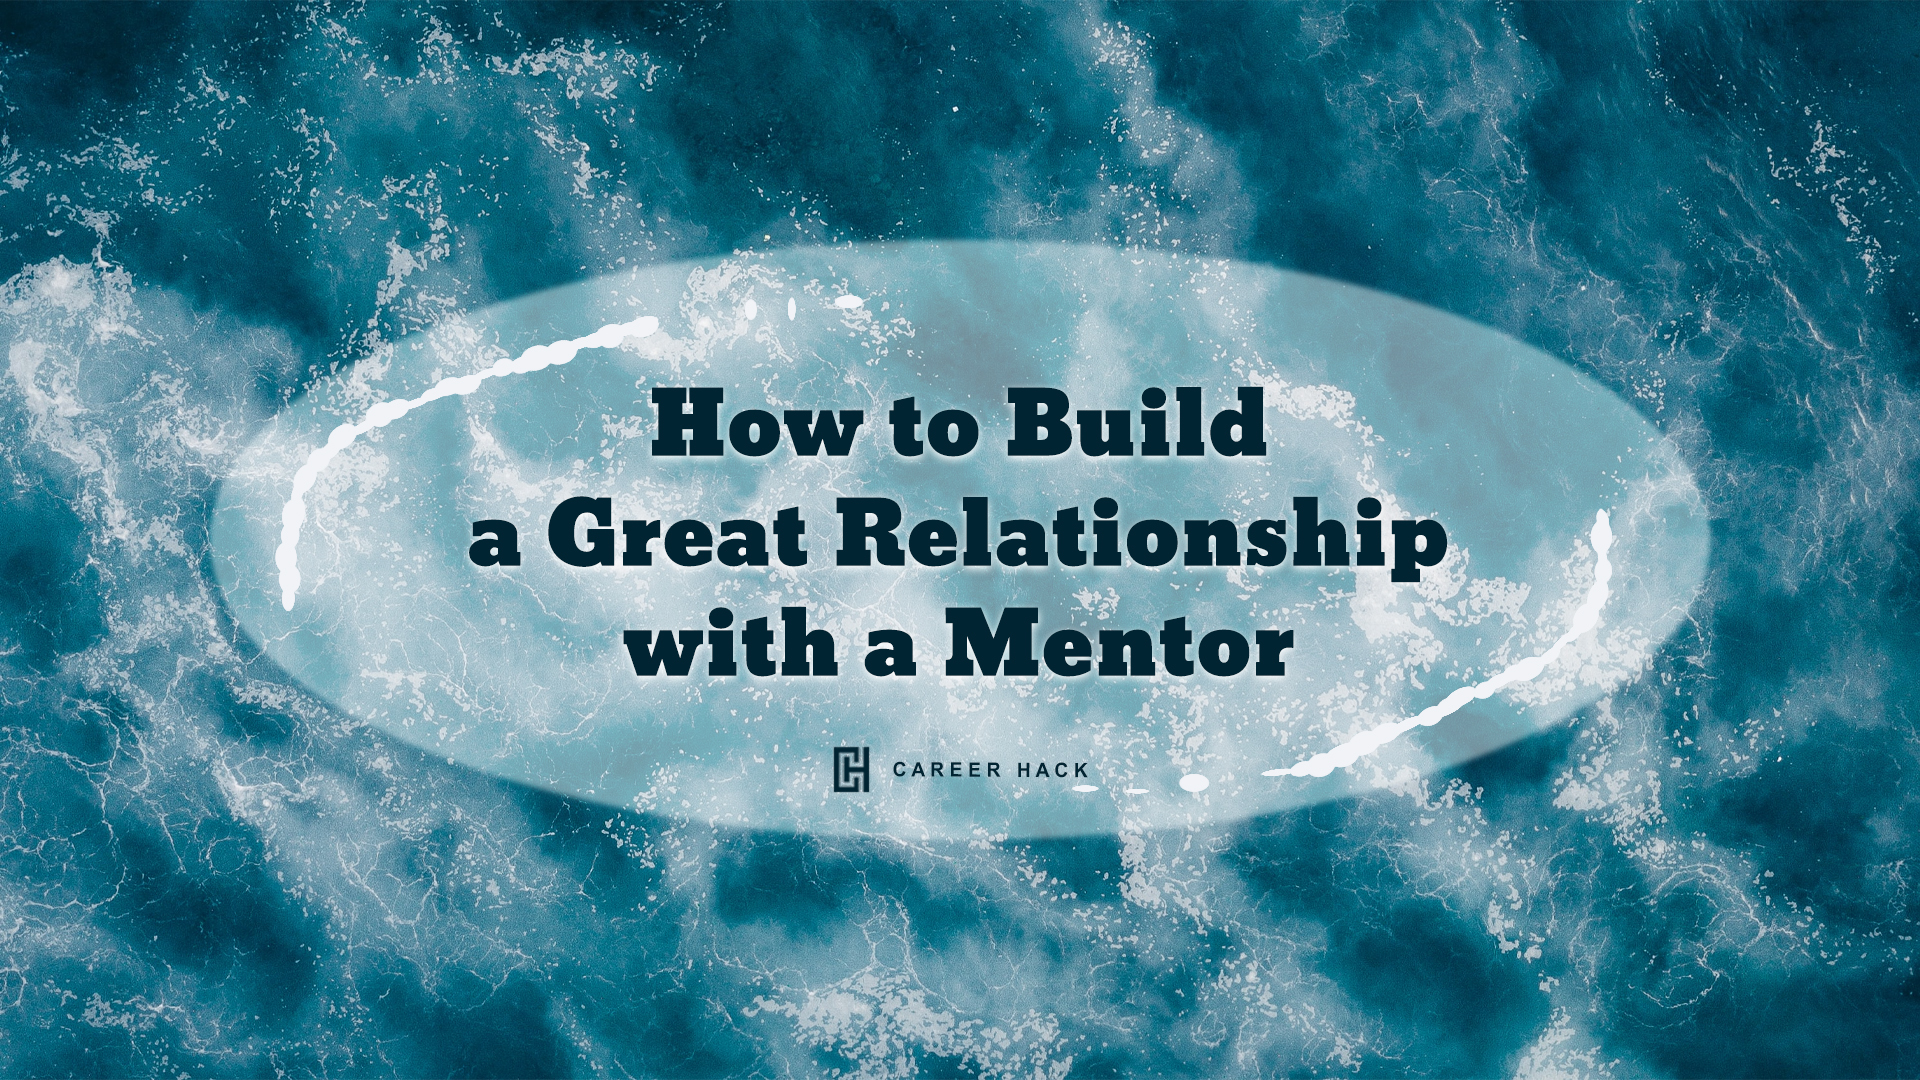 5 Tips on How to Build a Great Relationship with Your Mentor